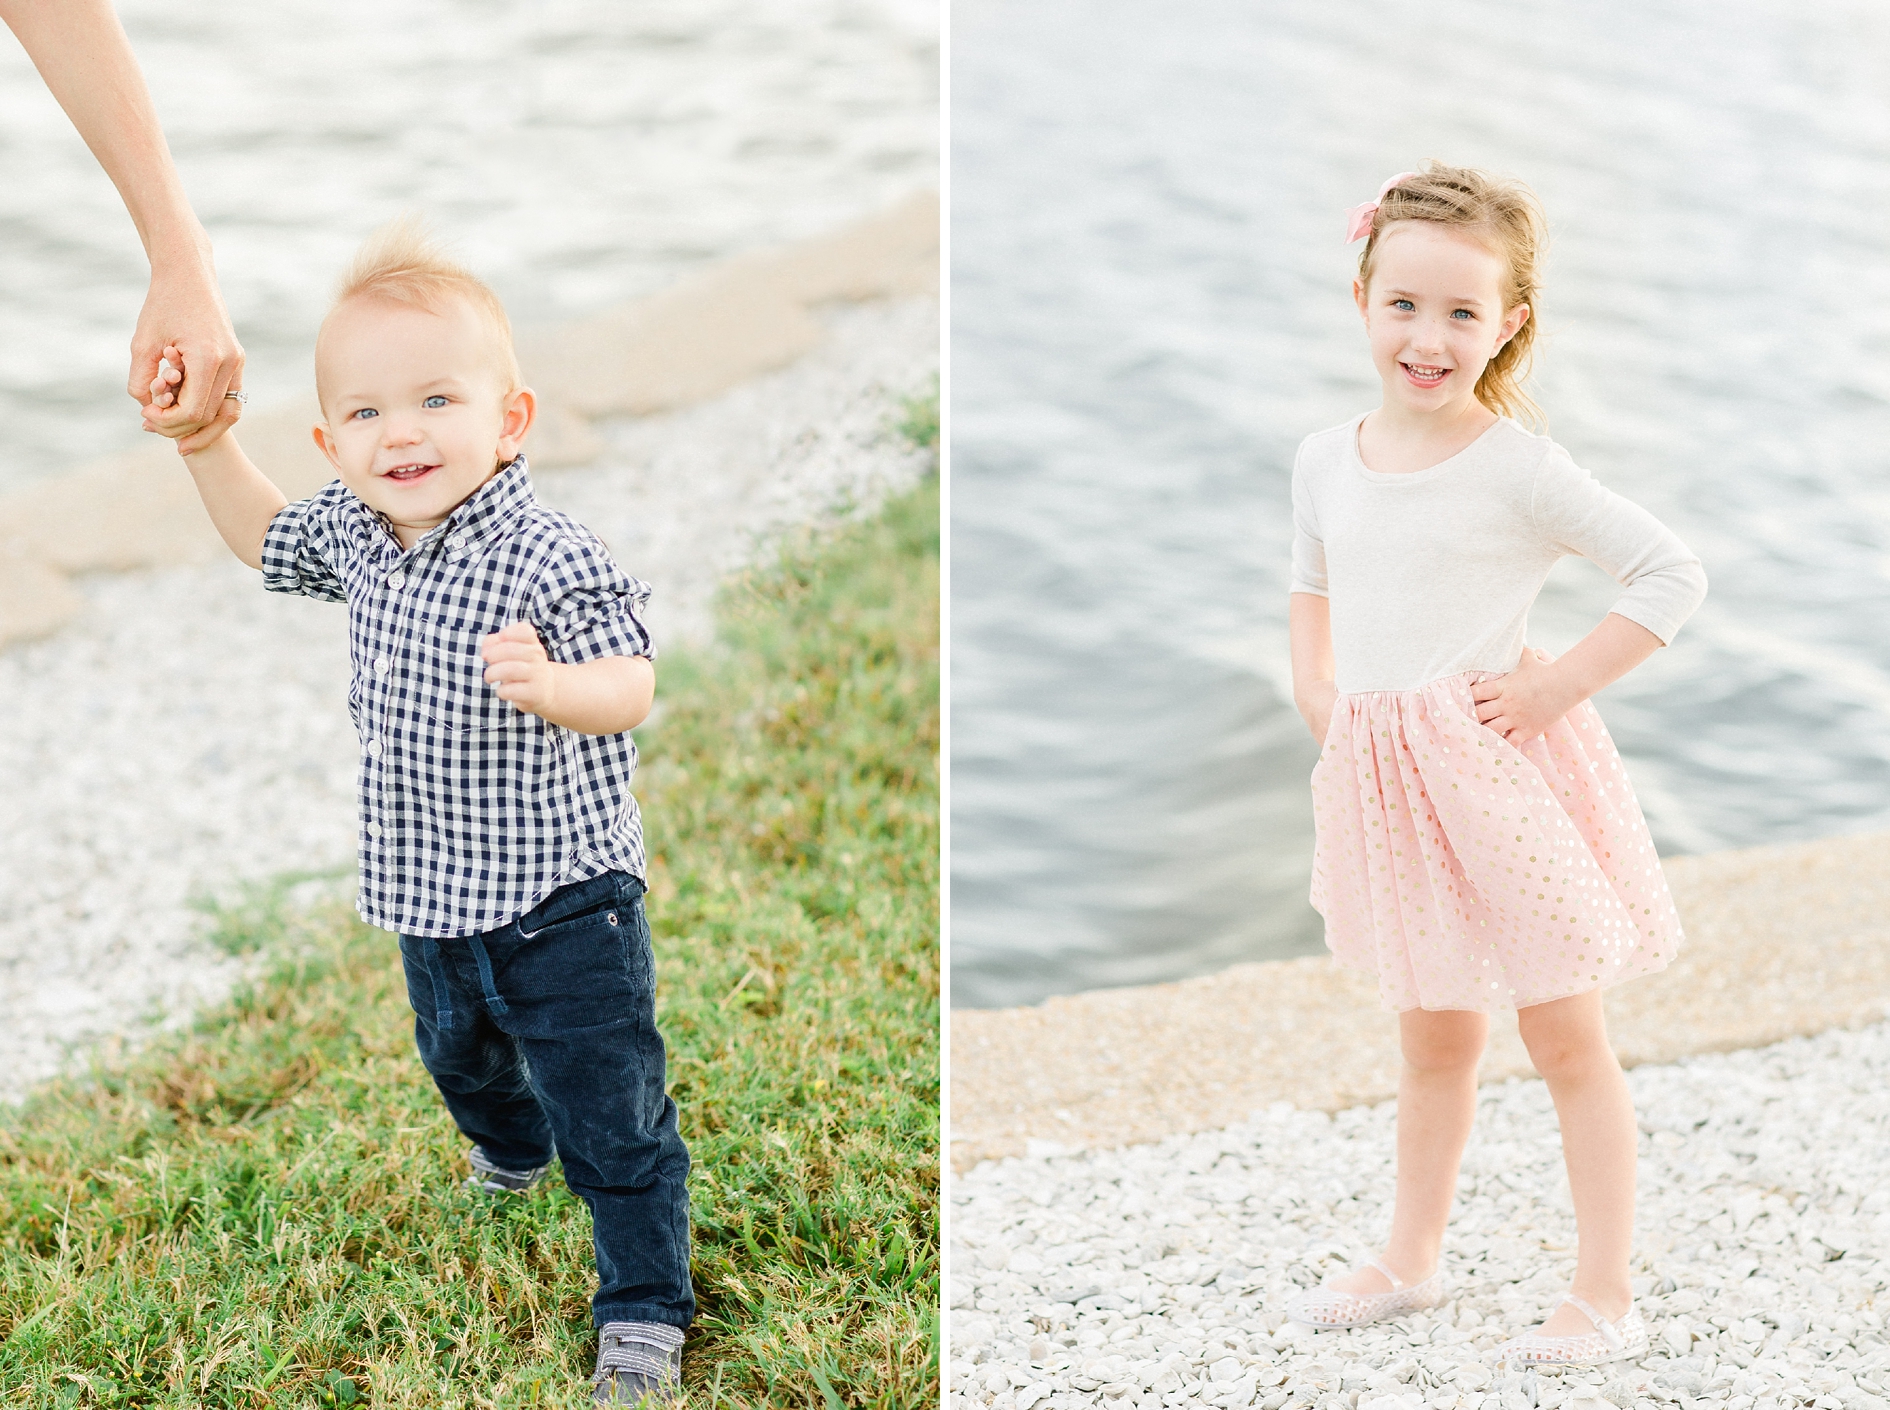 South Tampa Family Photographer | © Ailyn La Torre Photography 2016